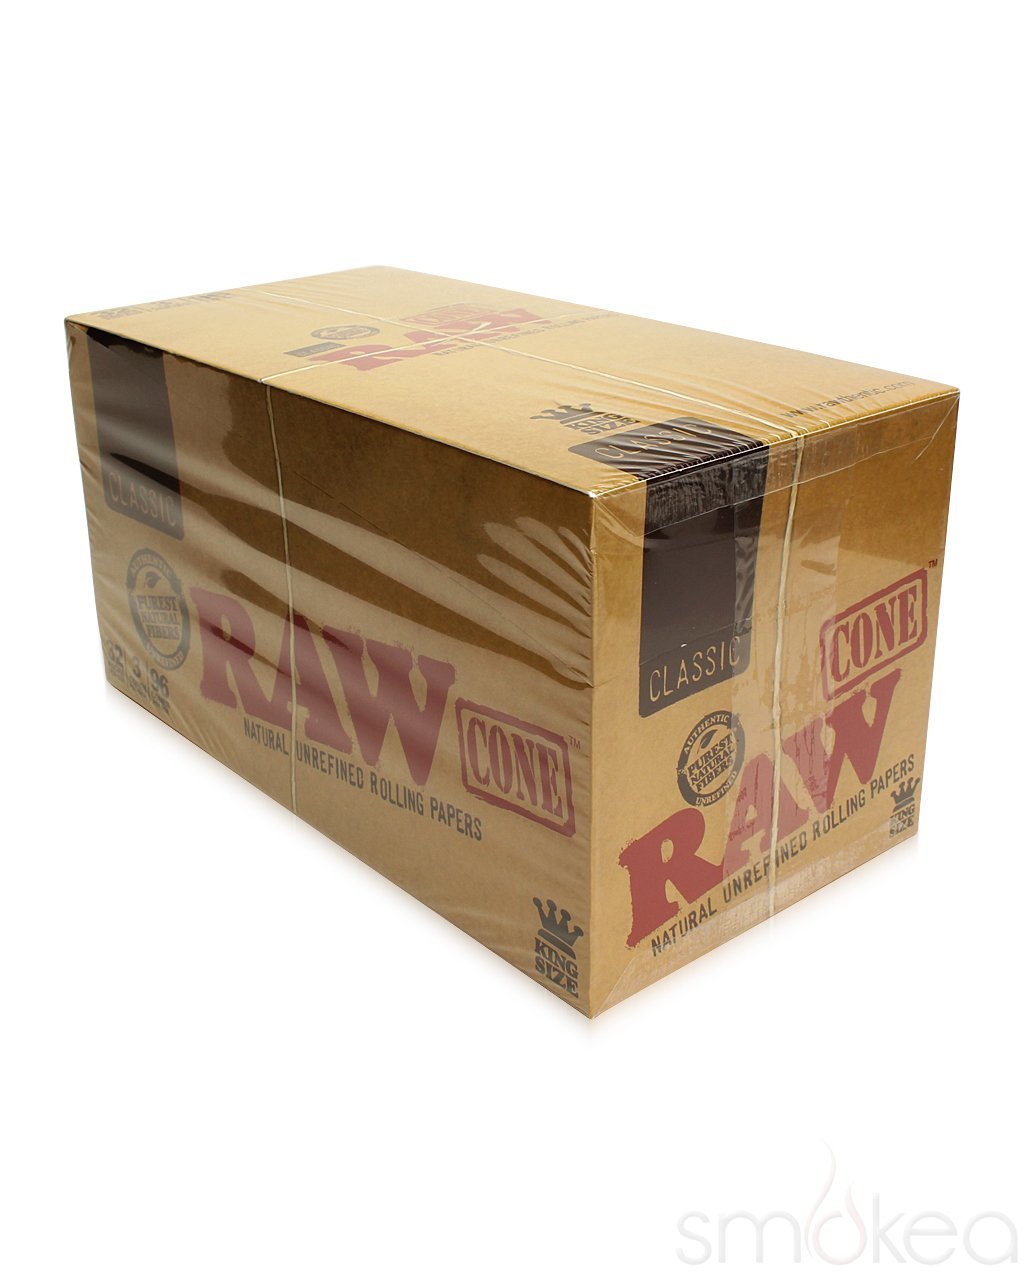 Raw Classic King Size Pre-Rolled Cones (Full Box) - Bittchaser Smoke Shop